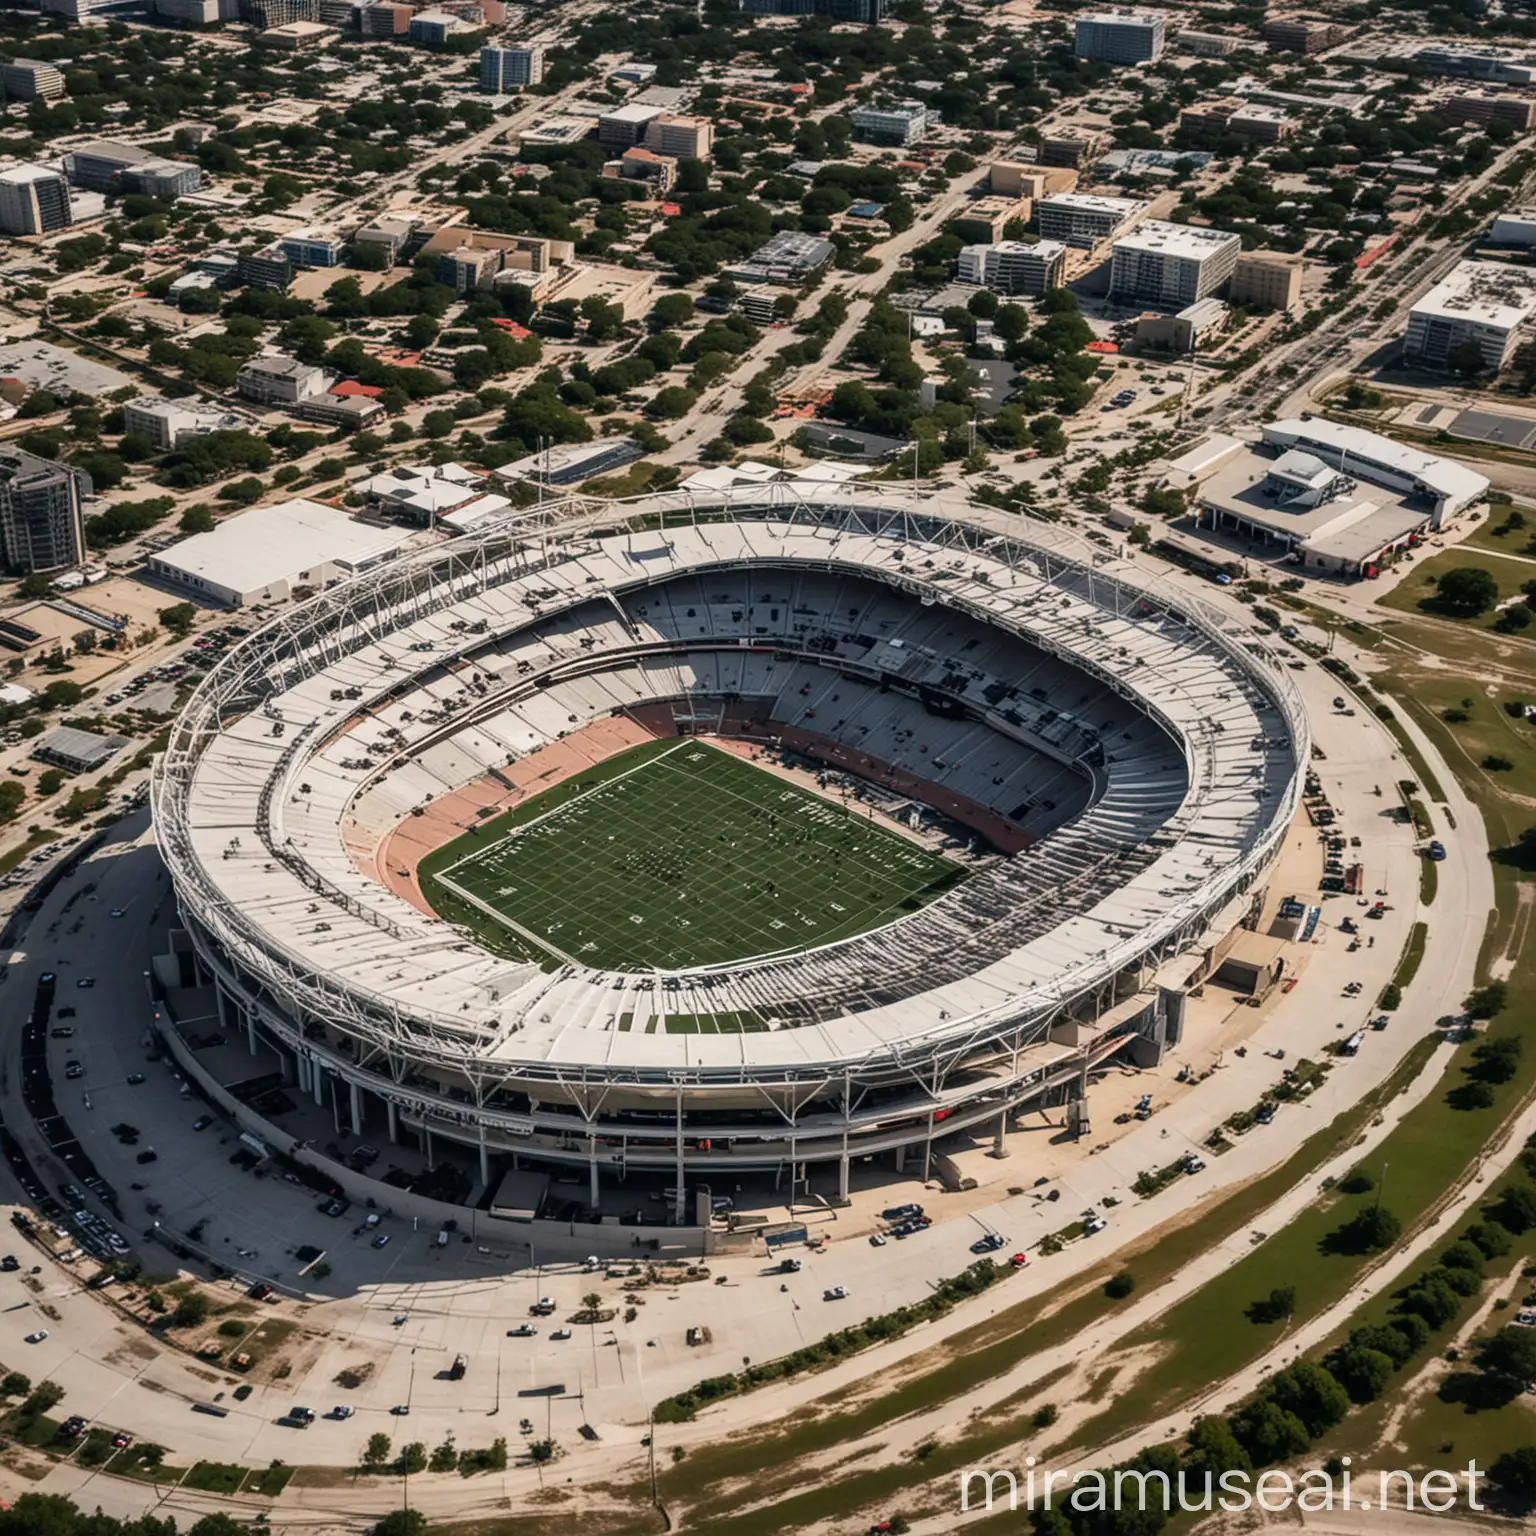 San Antonio Football Stadium Exciting Game Day Action in Iconic Sports Venue